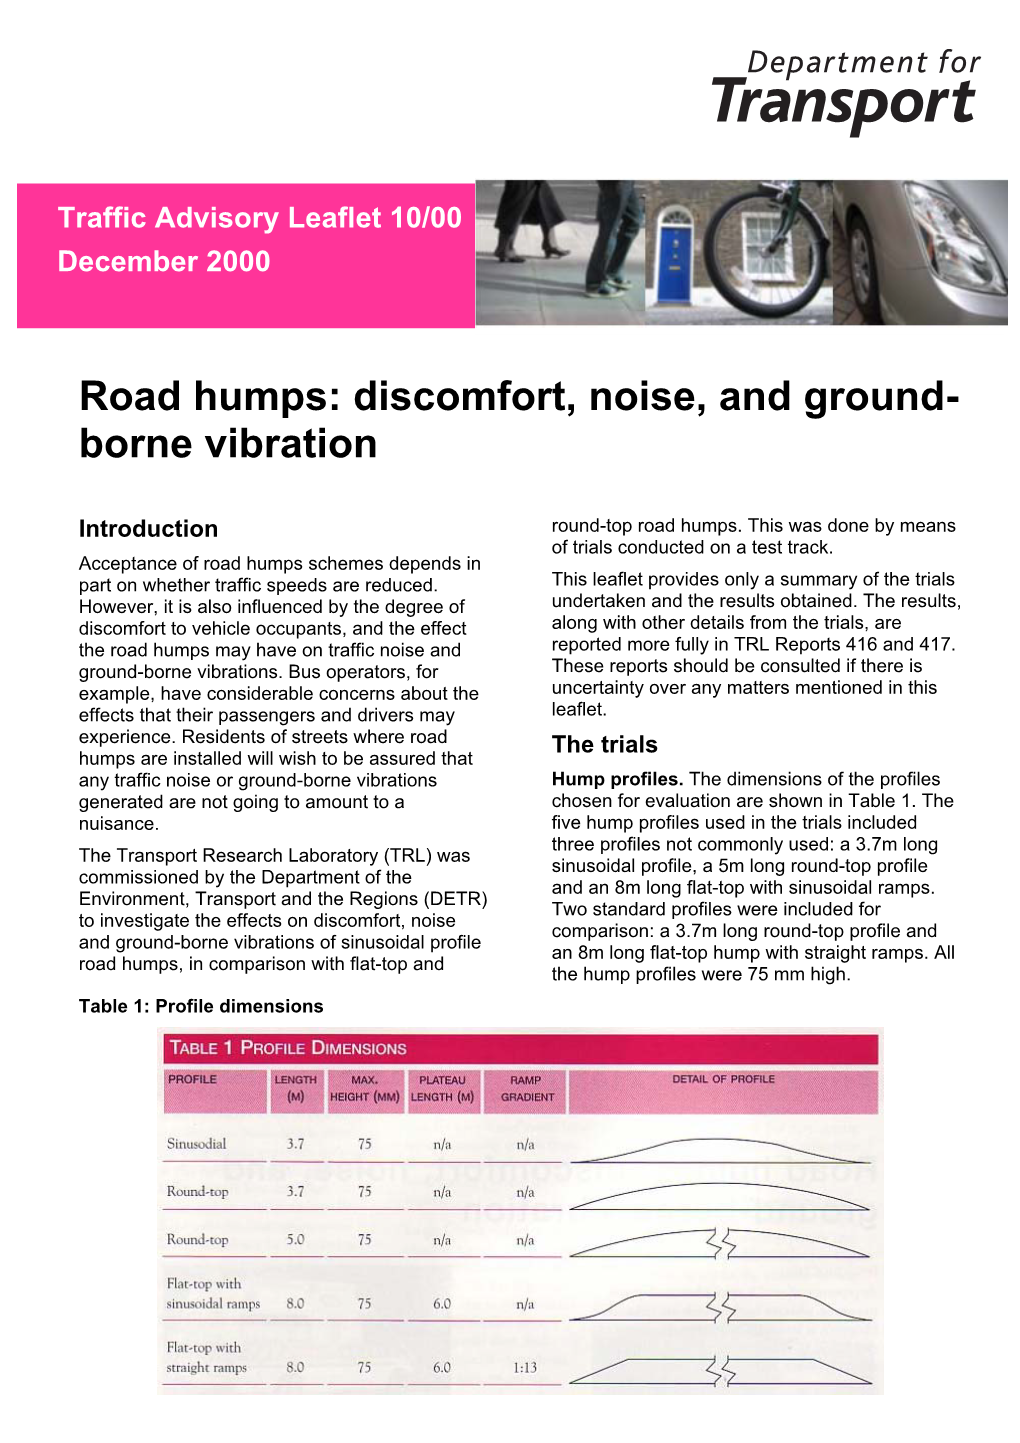 Road Humps: Discomfort, Noise, and Ground- Borne Vibration